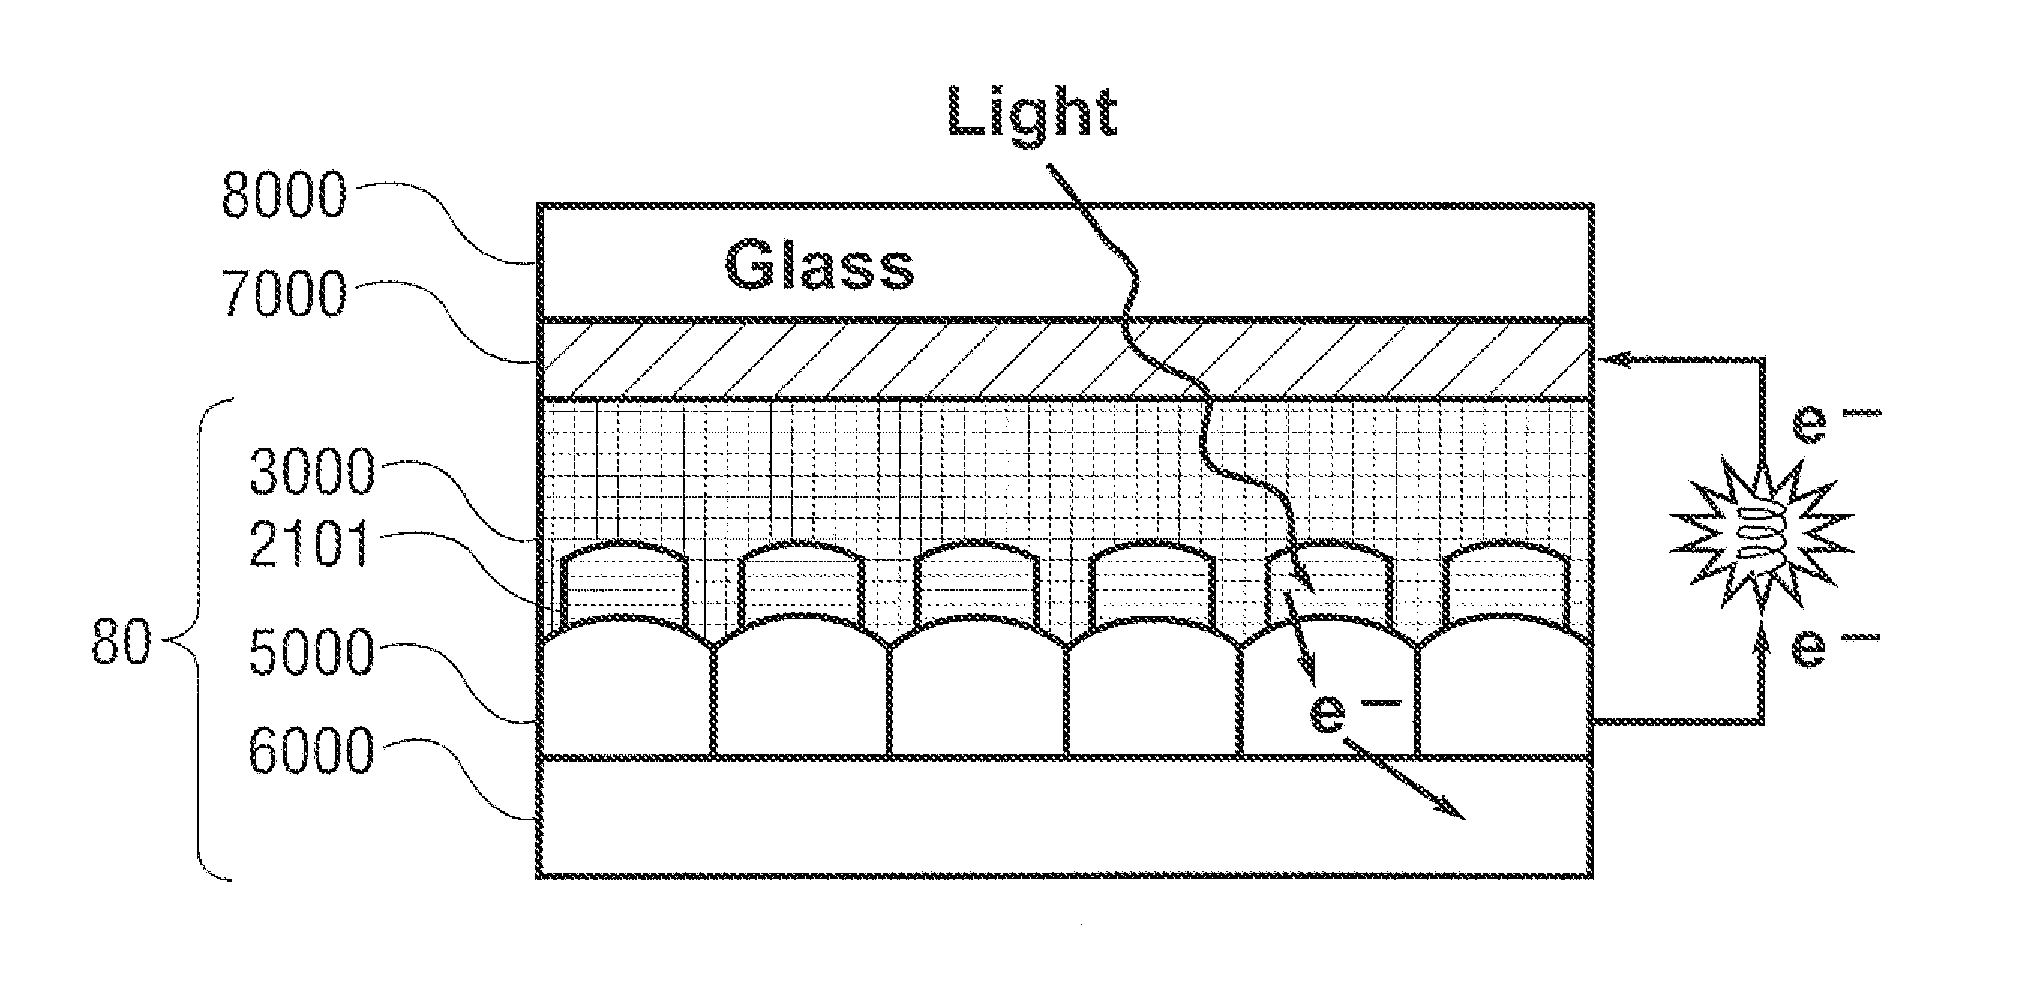 Thin-film photovoltaic structures including semiconductor grain and oxide layers